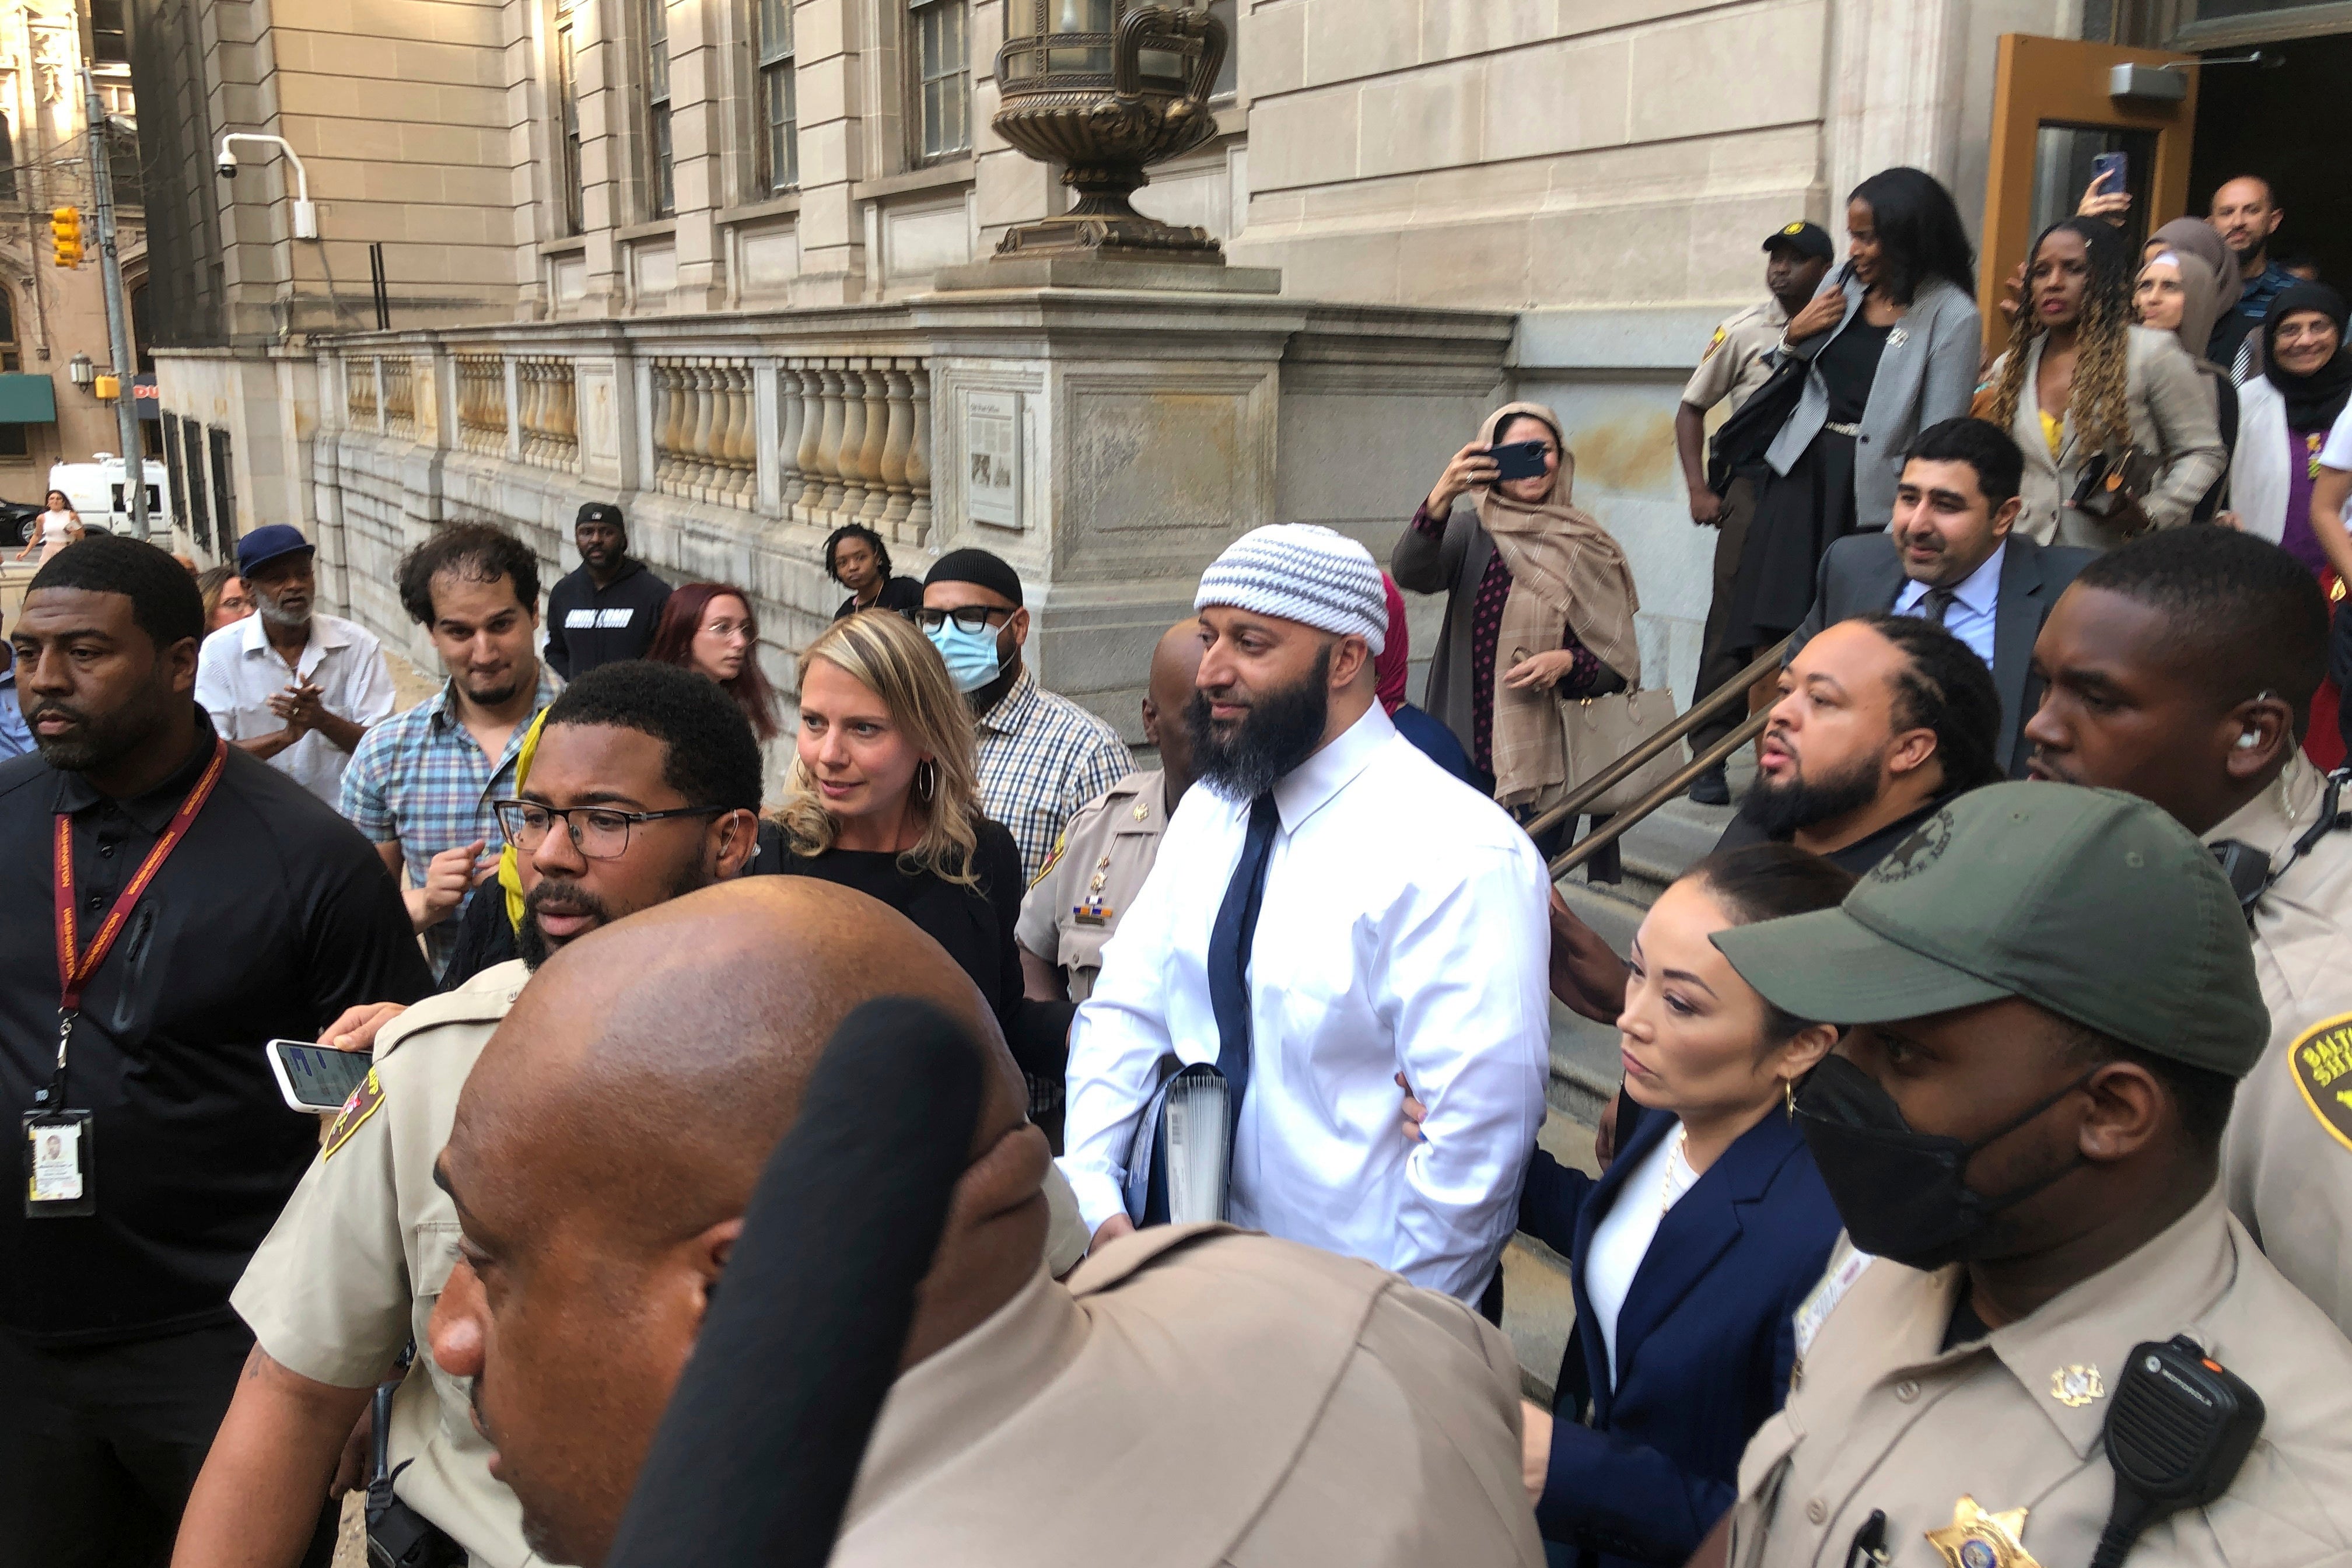 Adnan Syed leaves court in September 2022 after his conviction was overturned